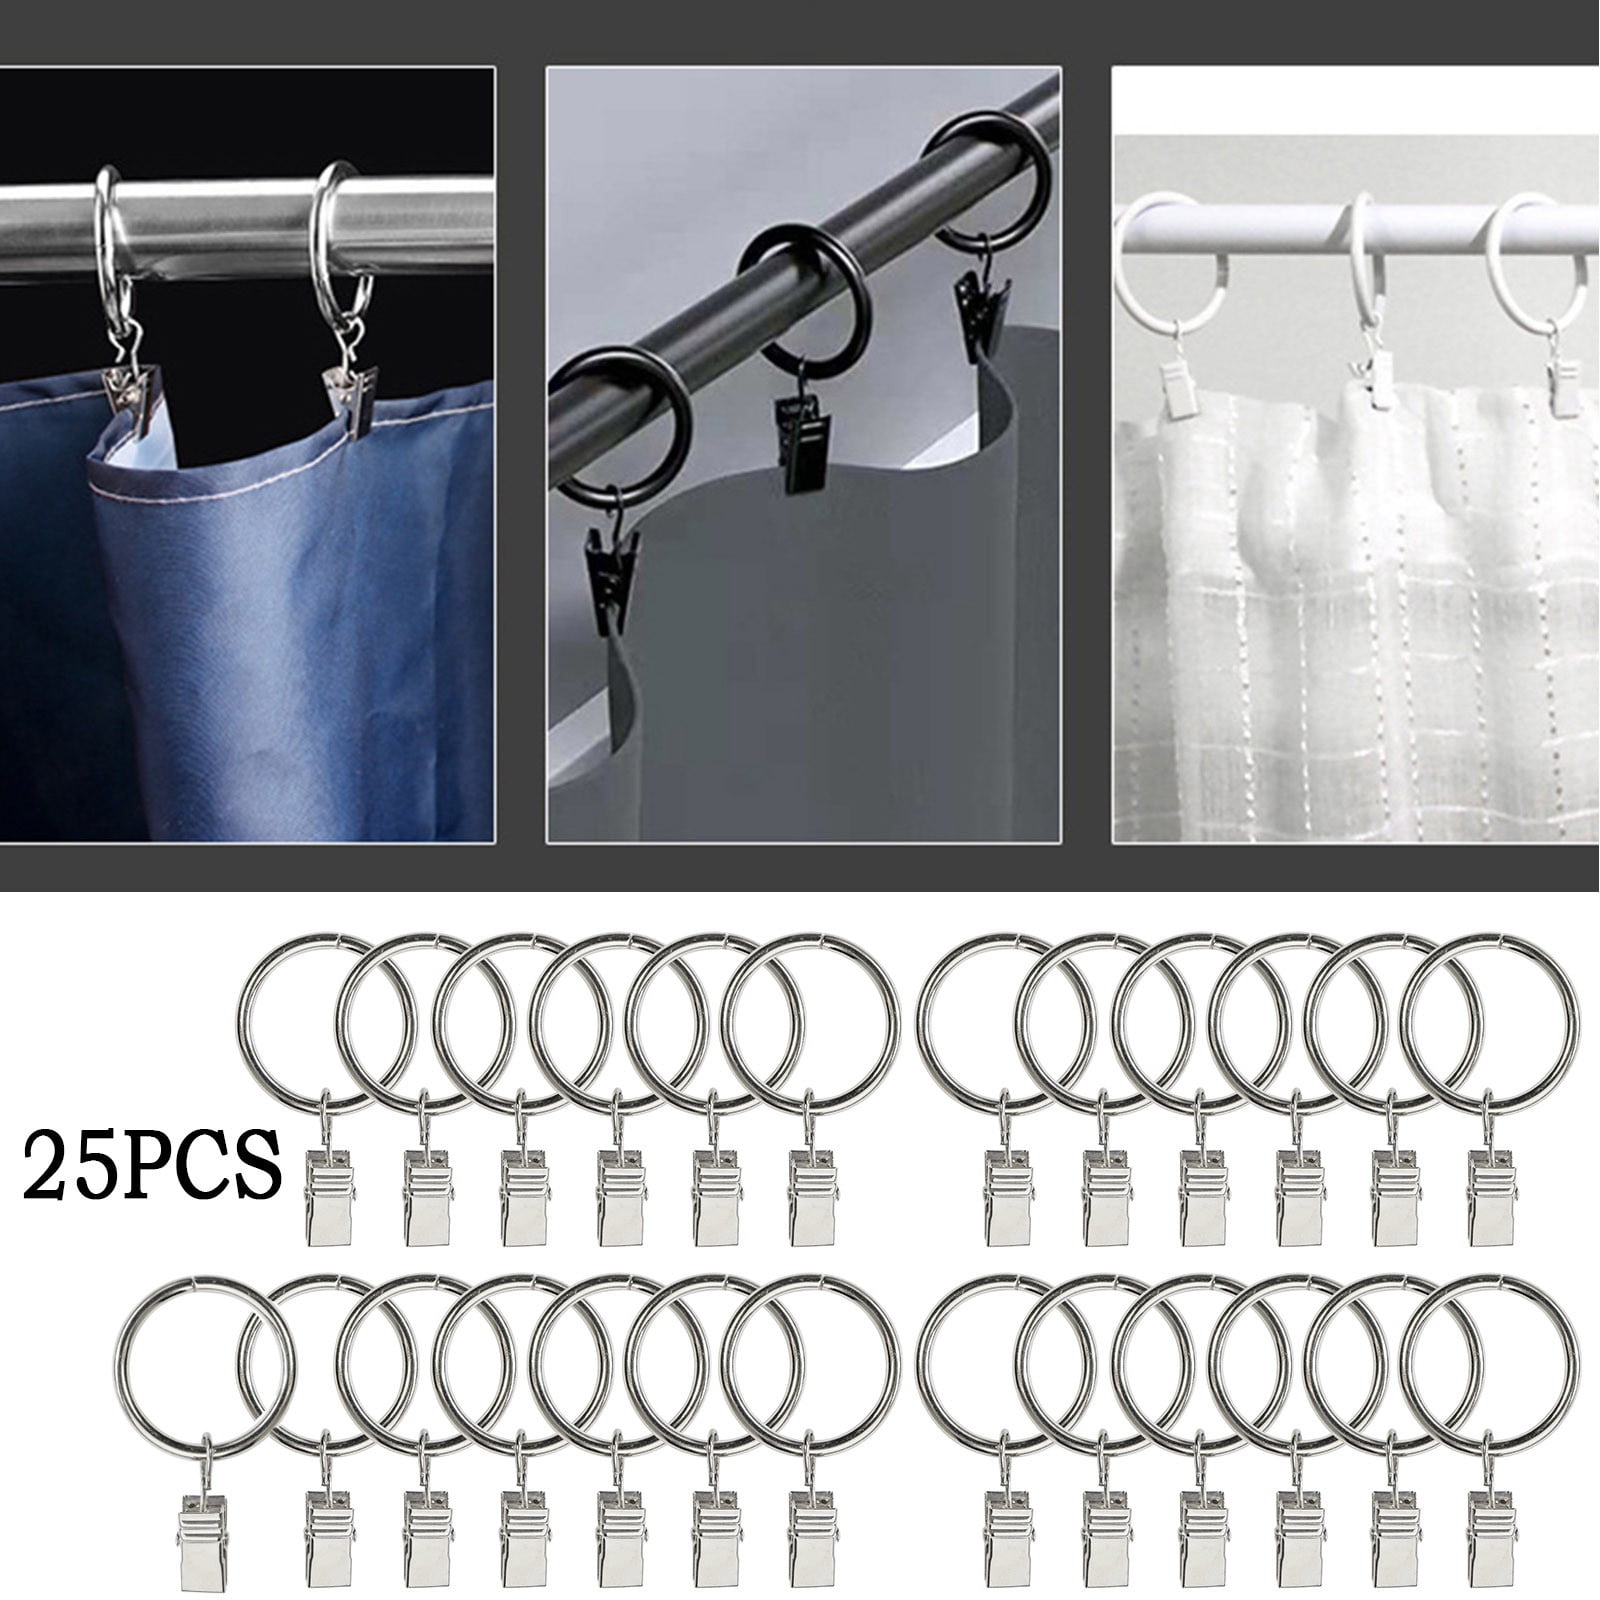 Royallove Curtain Rings With Clips 25 Pack Metal Curtain Clips ...